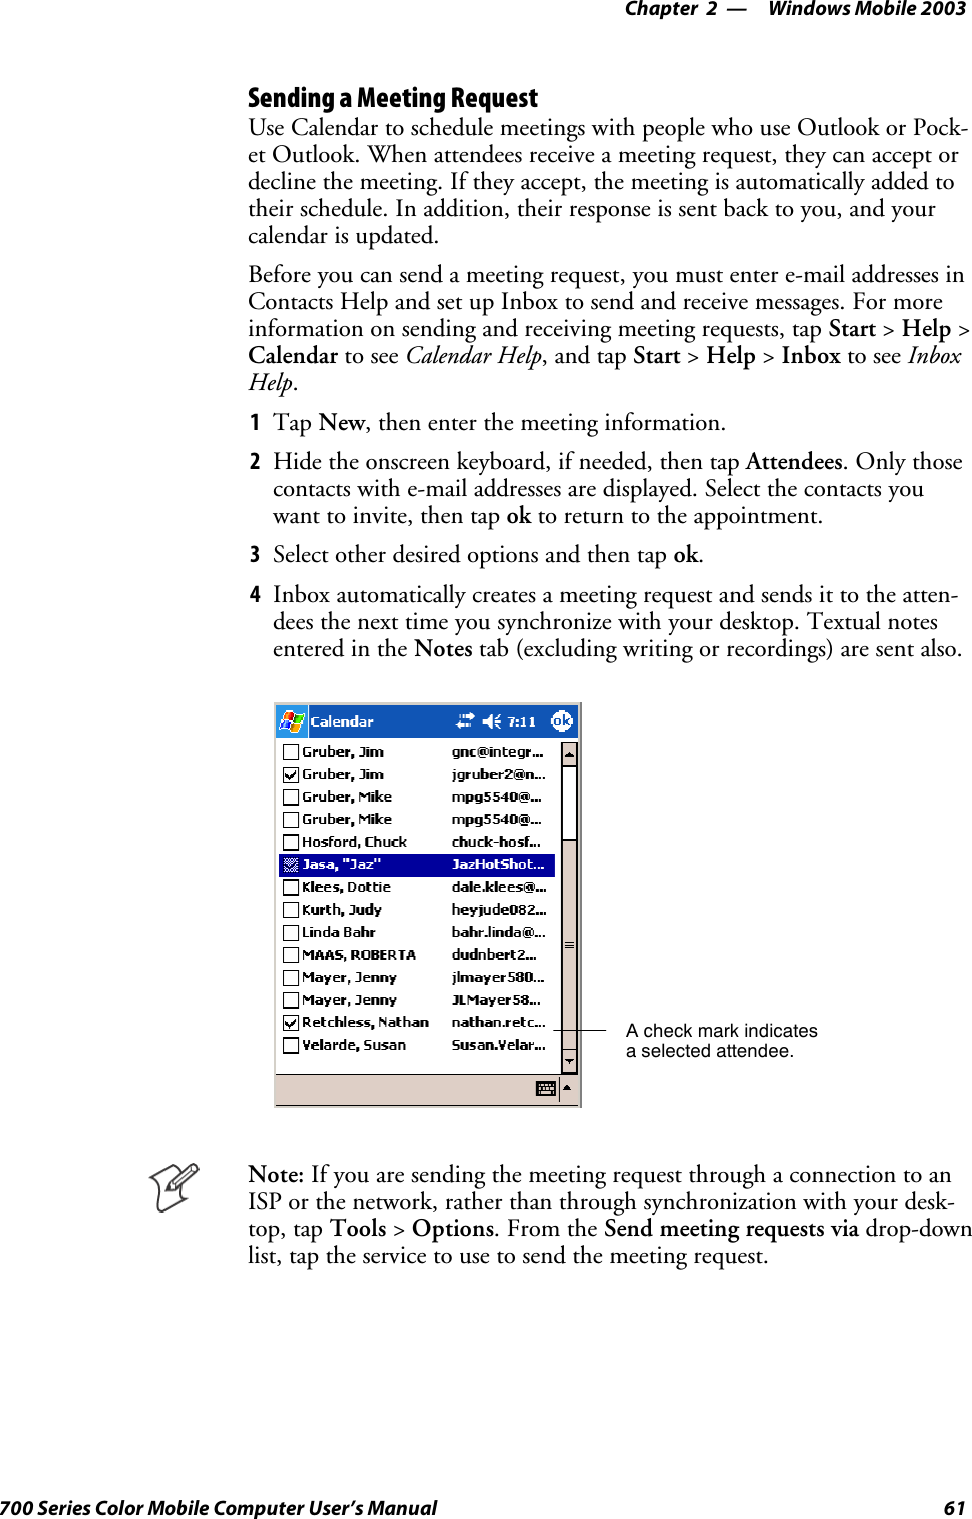 Windows Mobile 2003—Chapter 261700 Series Color Mobile Computer User’s ManualSending a Meeting RequestUse Calendar to schedule meetings with people who use Outlook or Pock-et Outlook. When attendees receive a meeting request, they can accept ordecline the meeting. If they accept, the meeting is automatically added totheir schedule. In addition, their response is sent back to you, and yourcalendar is updated.Before you can send a meeting request, you must enter e-mail addresses inContacts Help and set up Inbox to send and receive messages. For moreinformation on sending and receiving meeting requests, tap Start &gt;Help &gt;Calendar to see Calendar Help,andtapStart &gt;Help &gt;Inbox to see InboxHelp.1Tap New, then enter the meeting information.2Hide the onscreen keyboard, if needed, then tap Attendees.Onlythosecontacts with e-mail addresses are displayed. Select the contacts youwant to invite, then tap ok to return to the appointment.3Select other desired options and then tap ok.4Inbox automatically creates a meeting request and sends it to the atten-dees the next time you synchronize with your desktop. Textual notesentered in the Notes tab (excluding writing or recordings) are sent also.A check mark indicatesa selected attendee.Note: If you are sending the meeting request through a connection to anISP or the network, rather than through synchronization with your desk-top, tap Tools &gt;Options.FromtheSend meeting requests via drop-downlist, tap the service to use to send the meeting request.